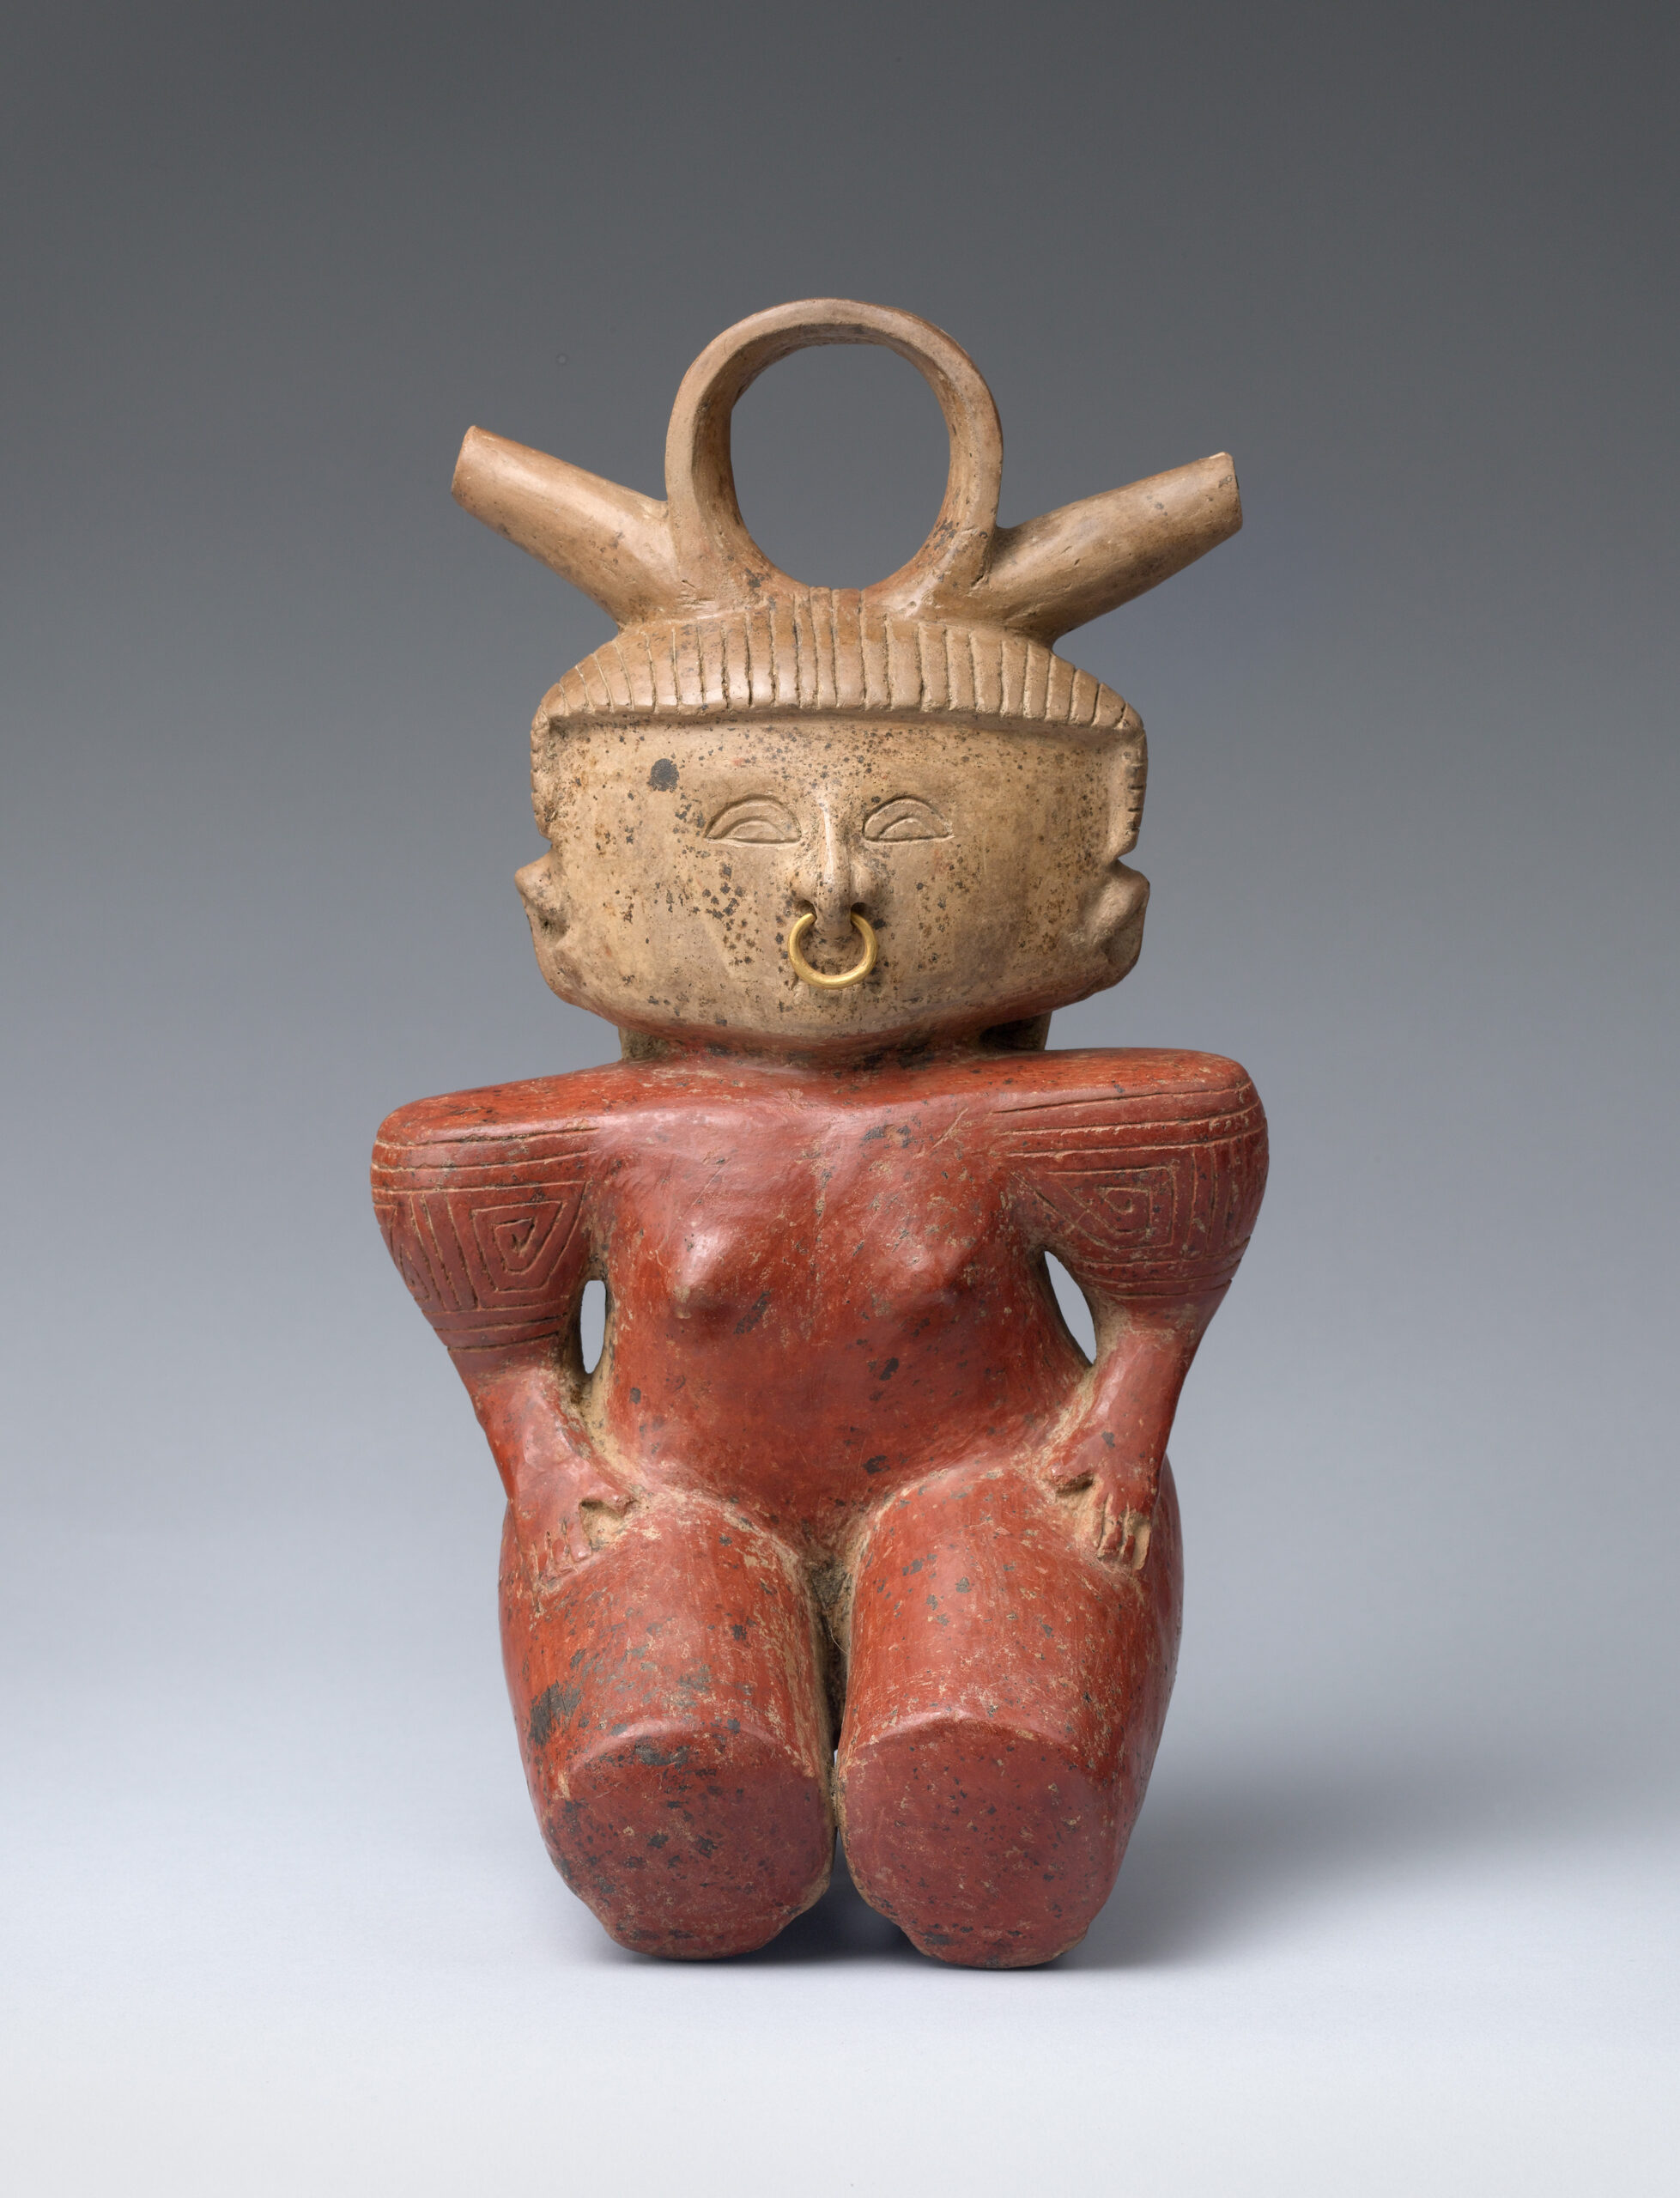 Kneeling woman with a red body and squared shoulders, flat squared face, nose-ring and abstract headpiece.